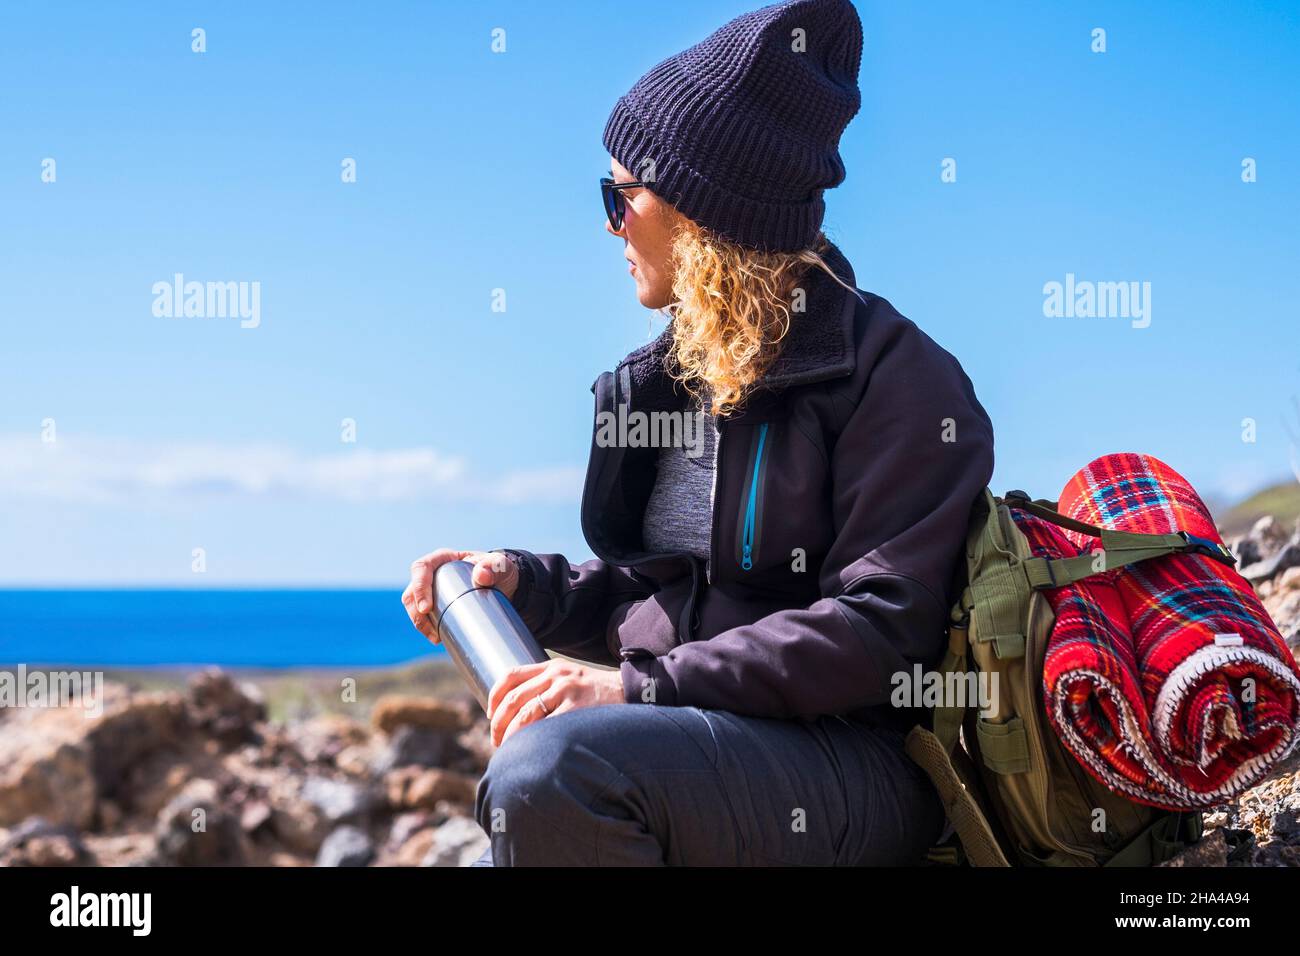 active adult lady resting and taking a break while do trekking adventure activity inthe nature. woman sit down on the rocks admiring ocean blue view. people travel with backpack Stock Photo